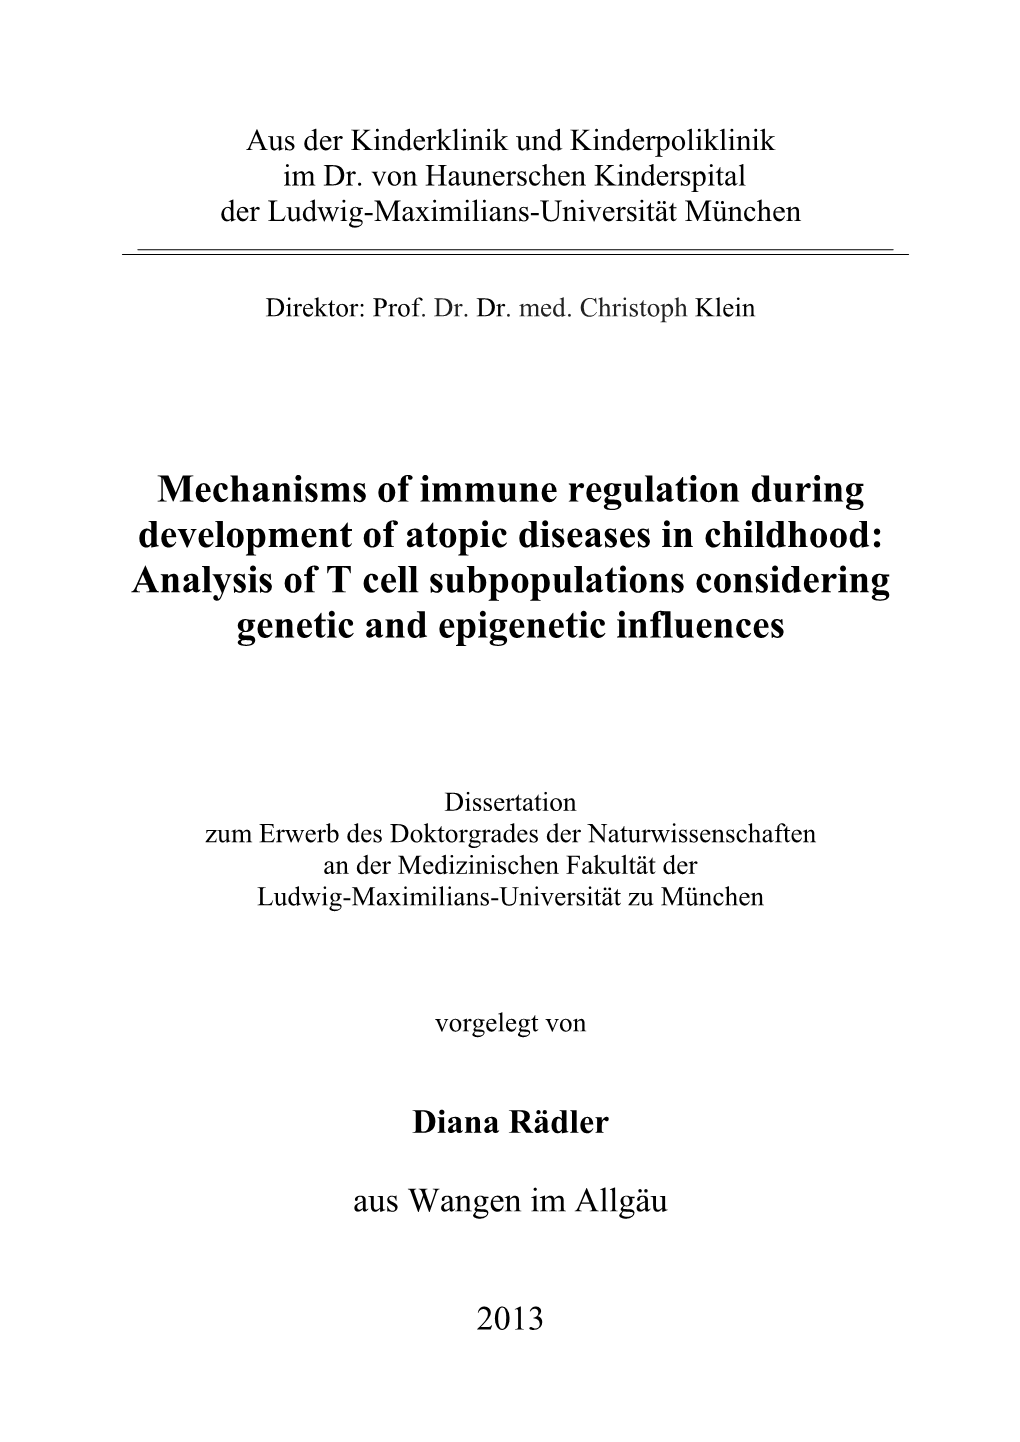 Mechanisms of Immune Regulation in the Development of Atopic Diseases